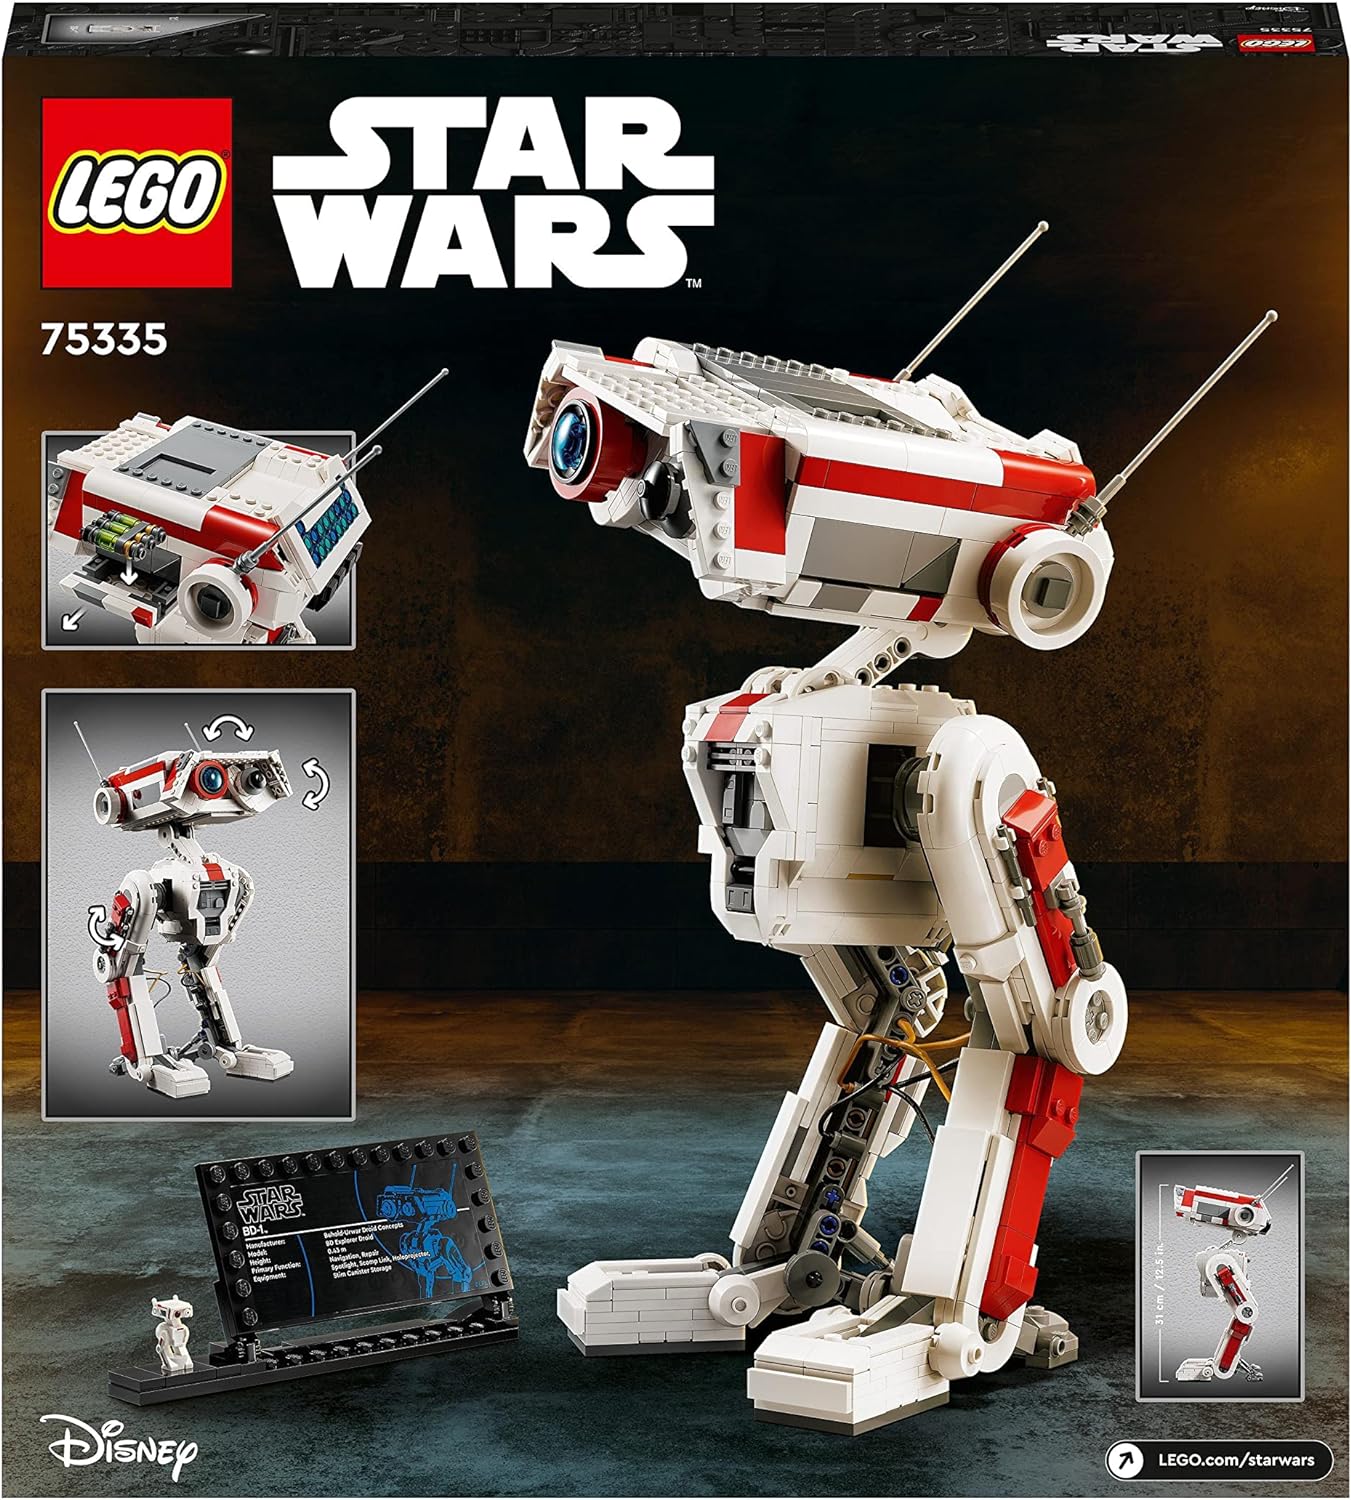 LEGO 75335 Star Wars BD-1 Model Kit, Movable Droid Figure, Room Decoration, Birthday Gift Idea for Boys & Girls, Teenagers from the Video Game Jedi: Fallen Order